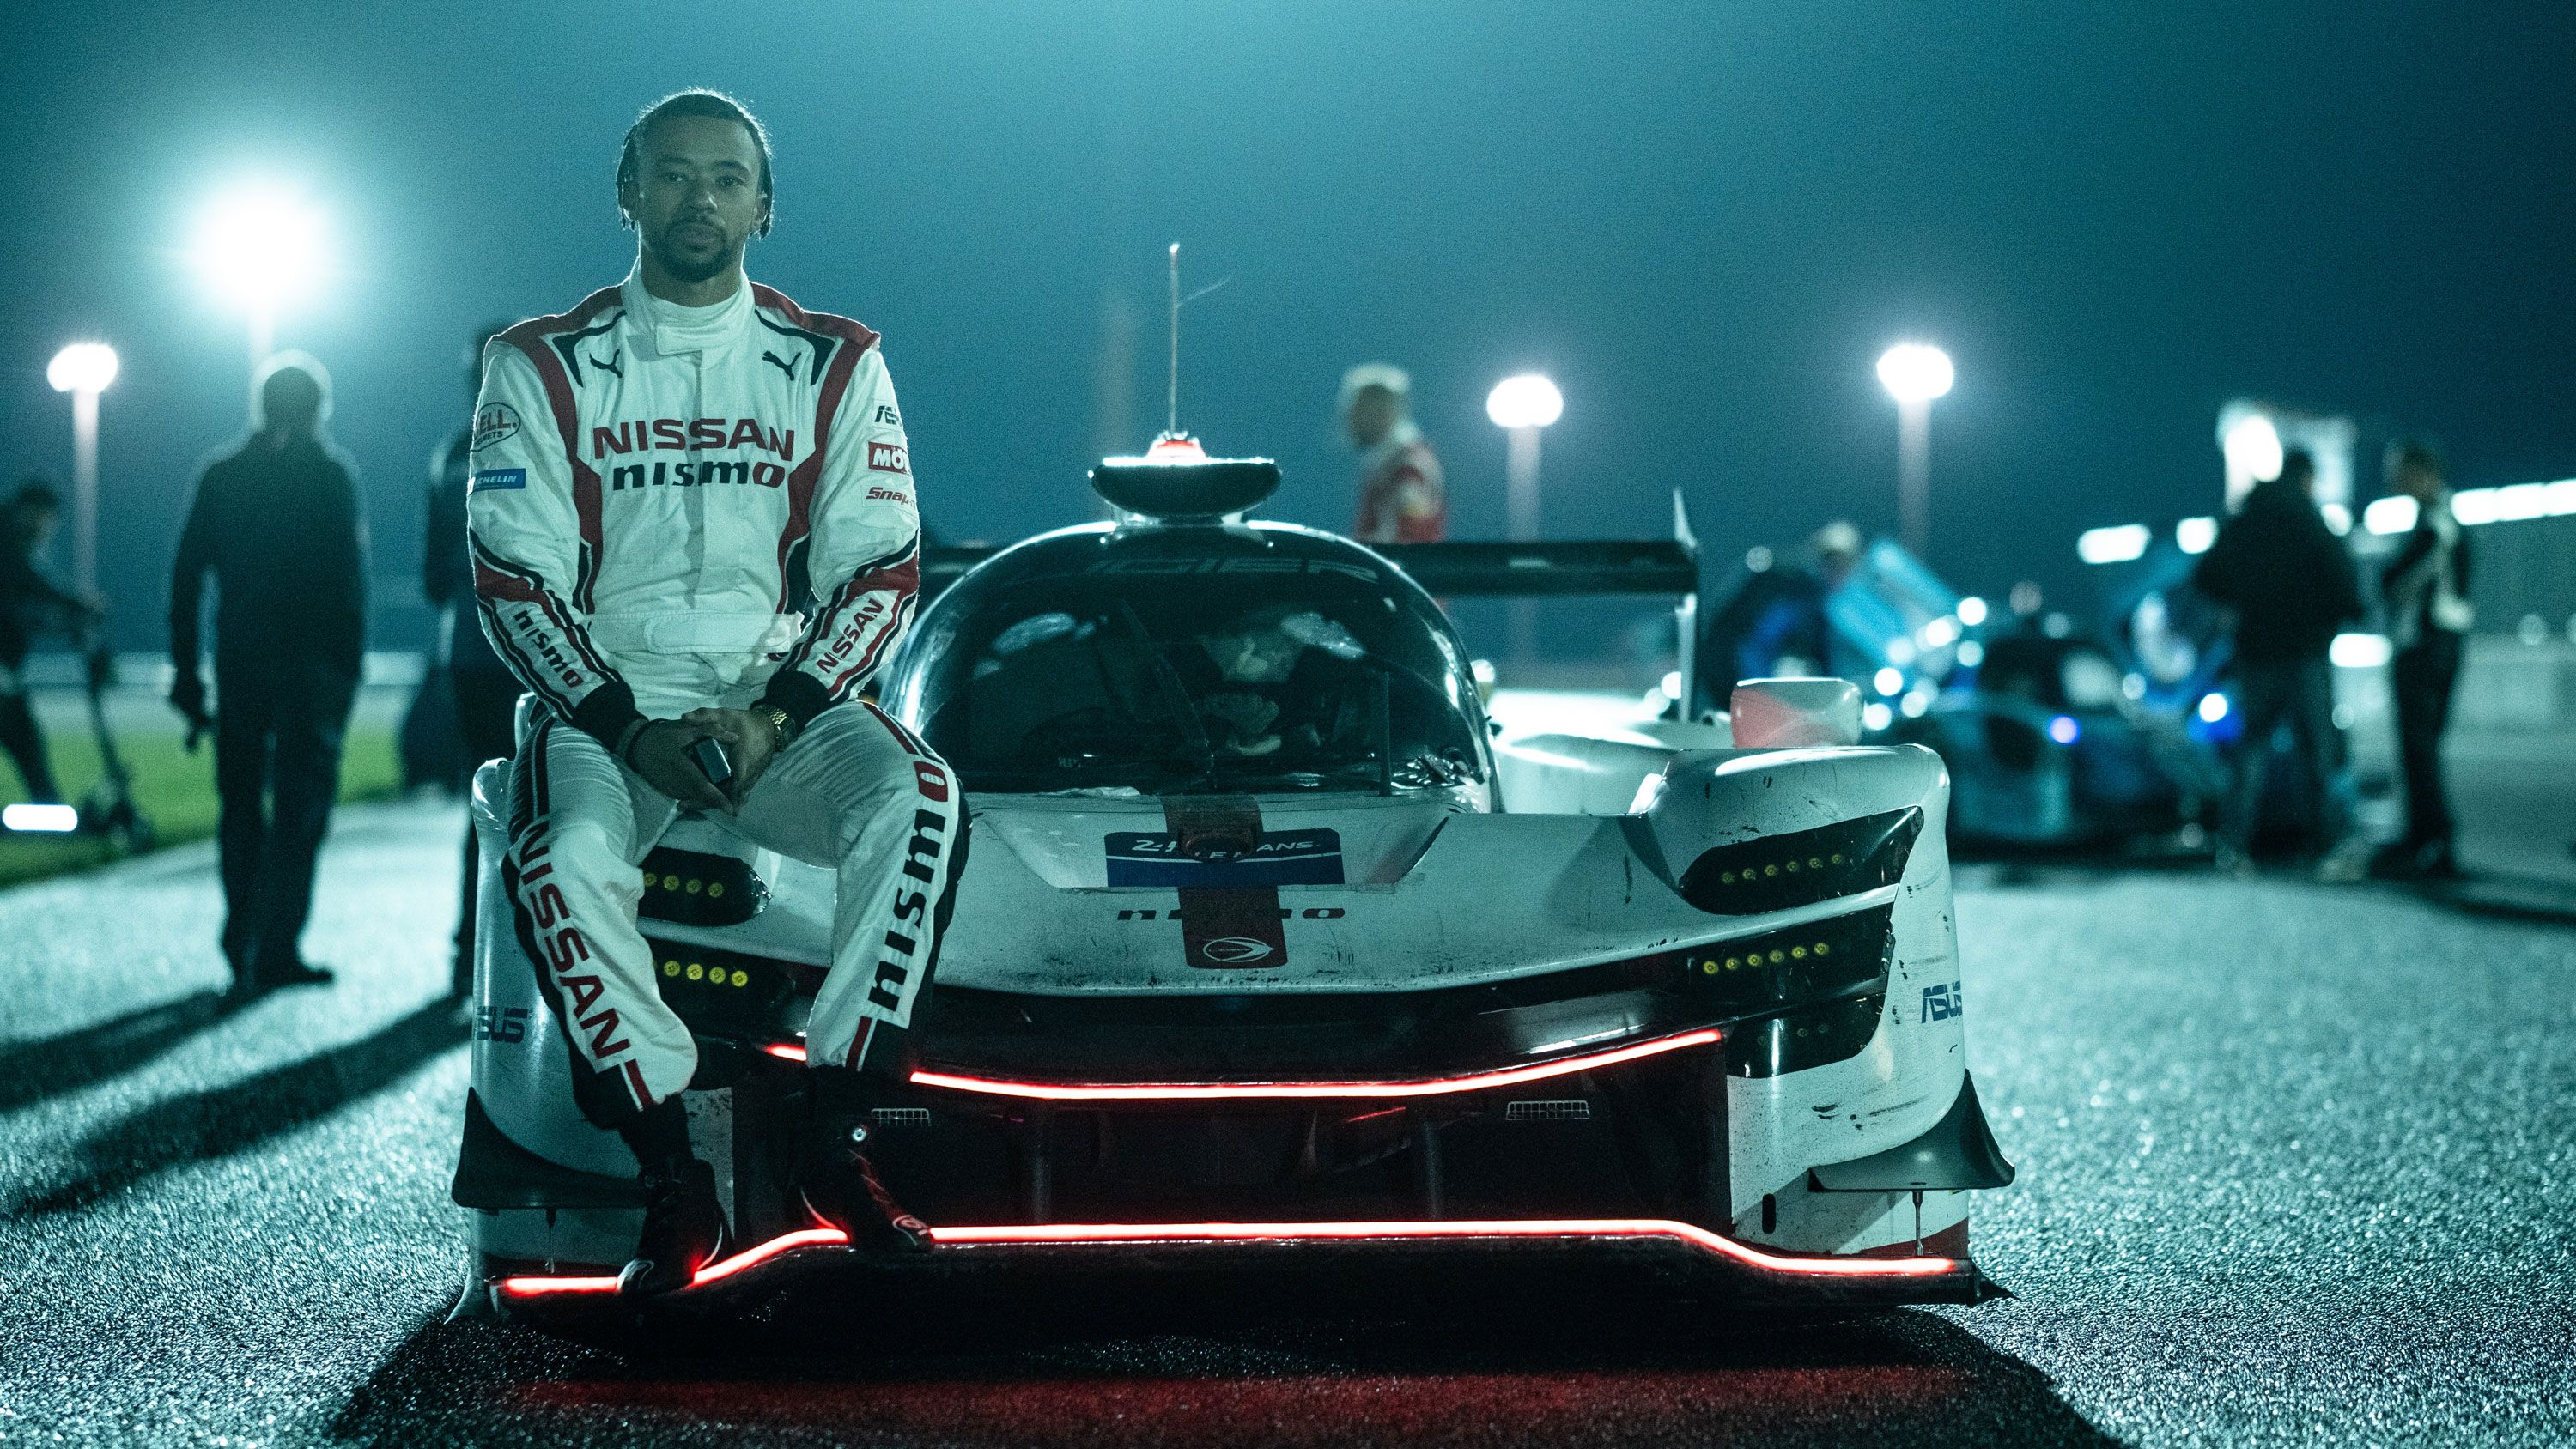 The Gran Turismo Movie's First Trailer Turns Gamers Into Racers